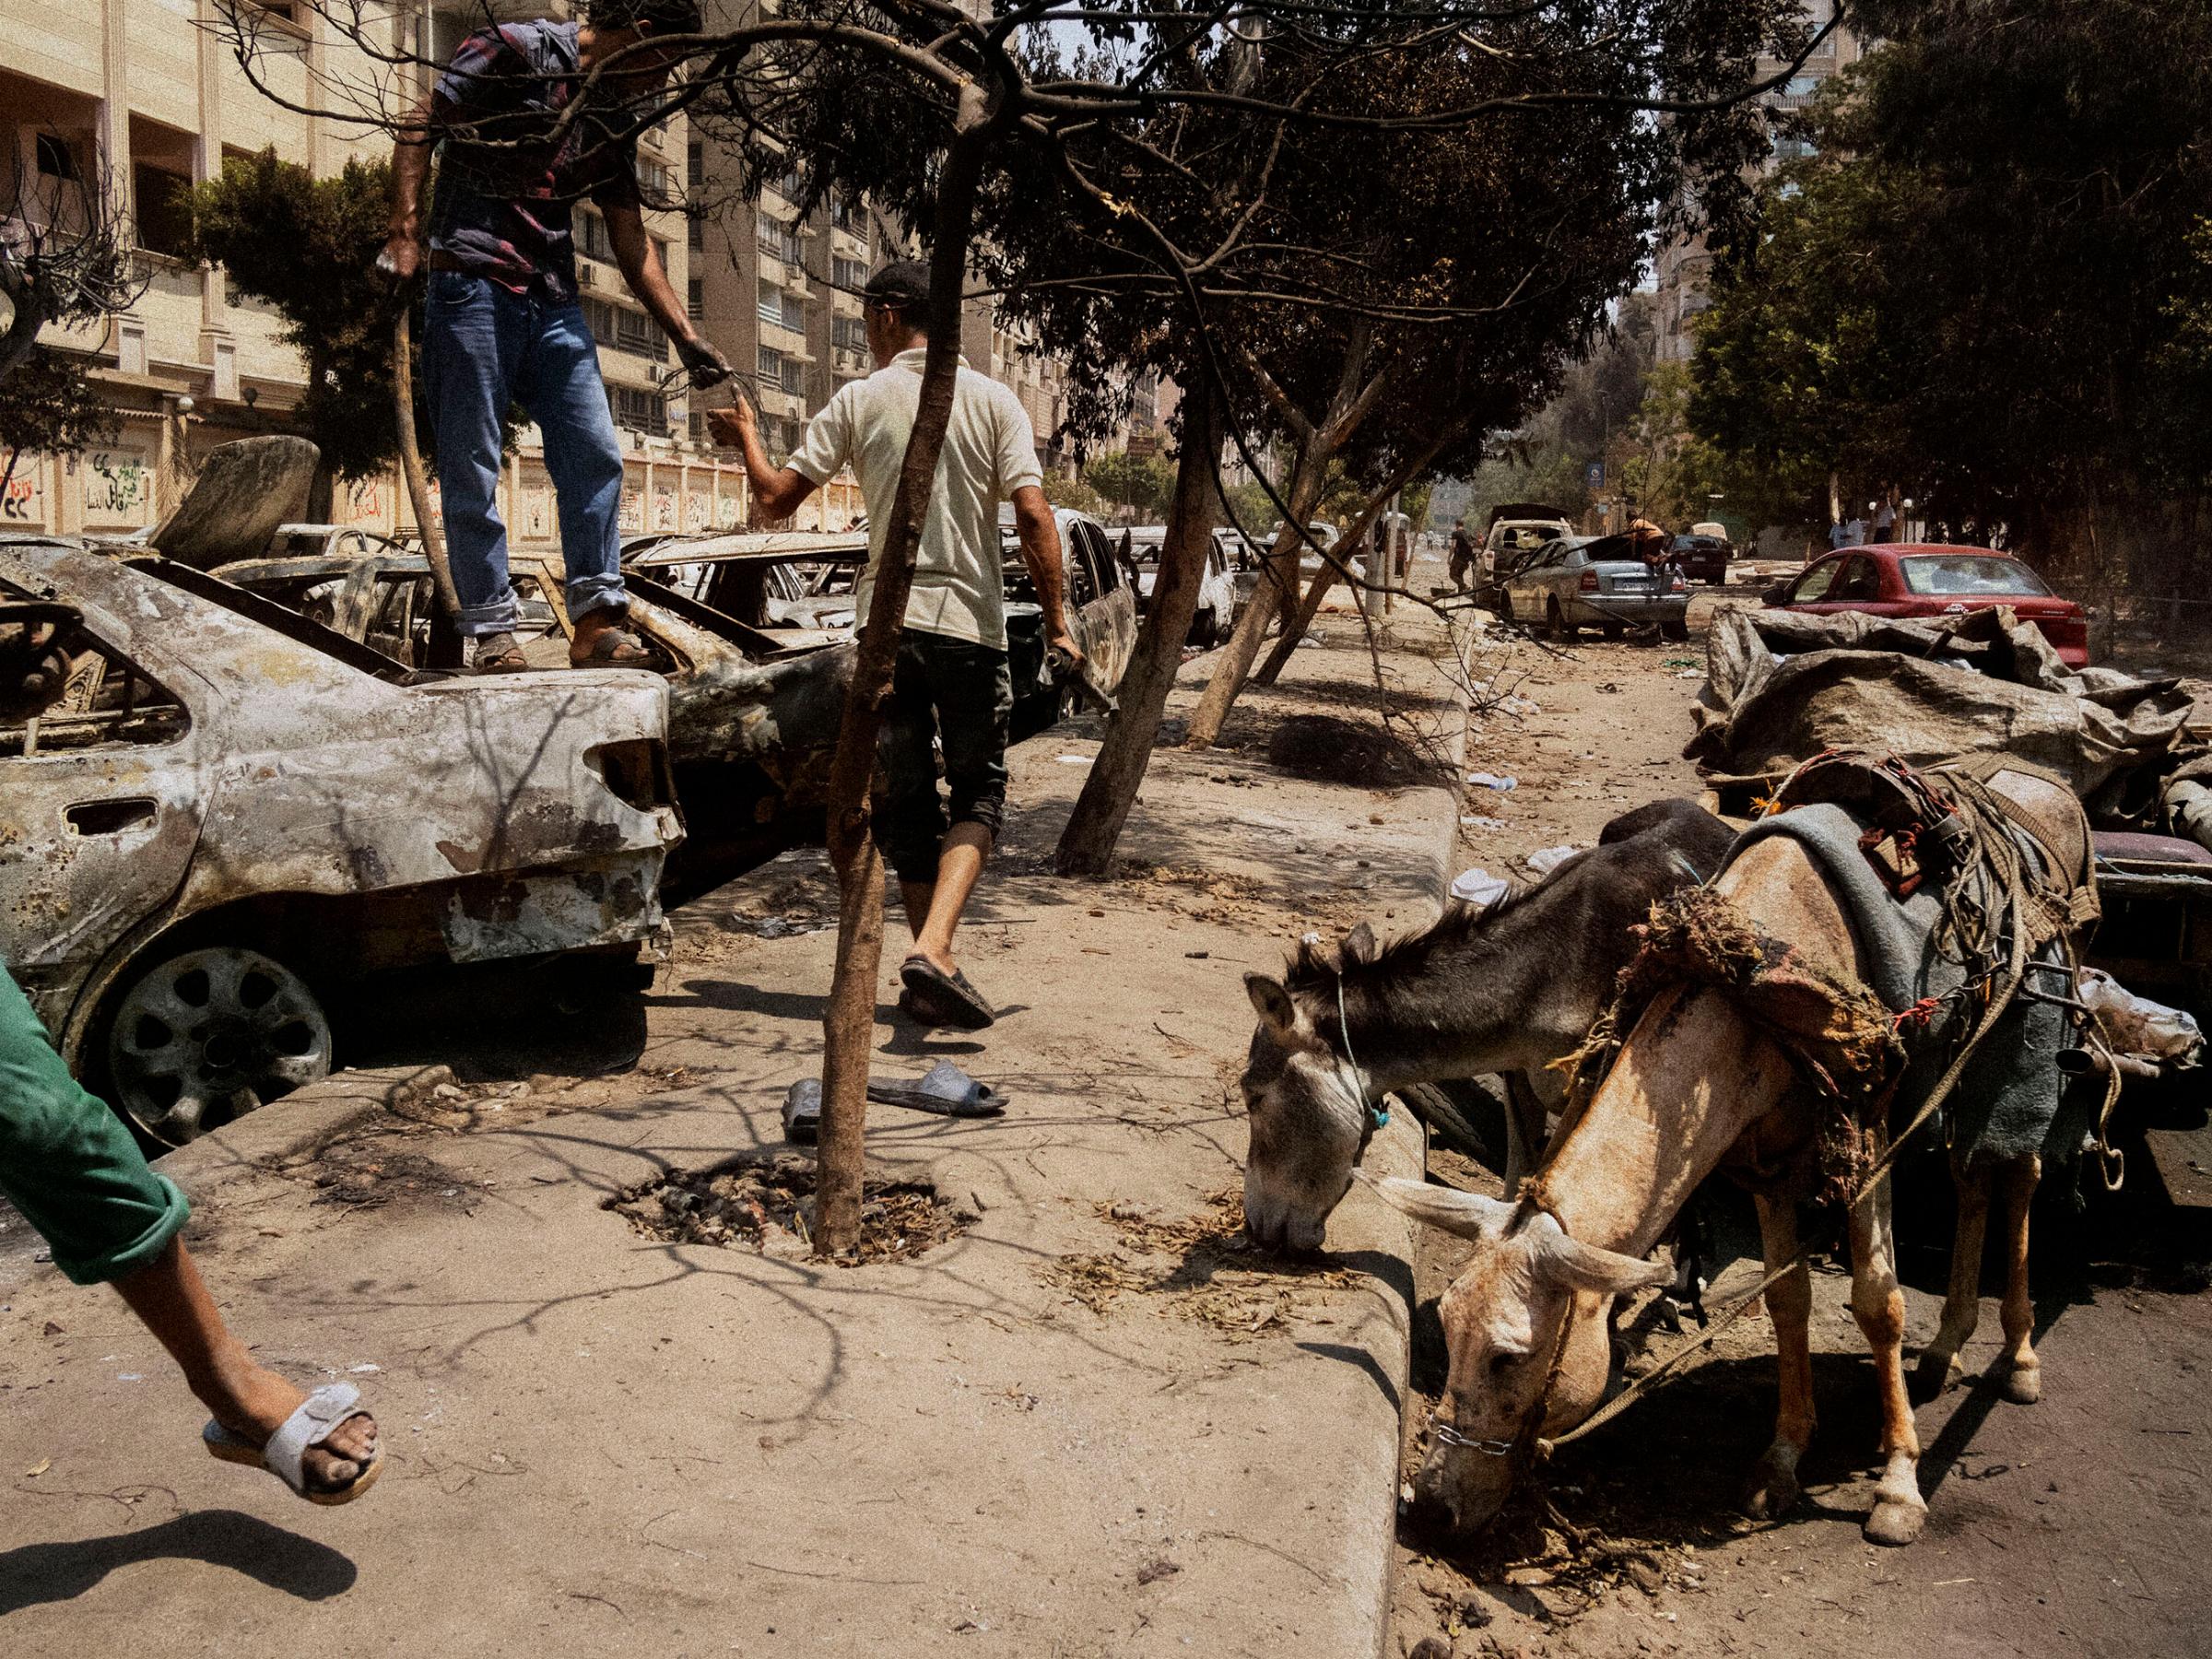 EGYPT. Cairo. 2013. Men collecting scrap metal from burned cars and debris next to the Rabaa al-Adawiya mosque in Nasr City, the site of a massacre against Muslim Brotherhood supporters at the hands of the Egyptian police and army.